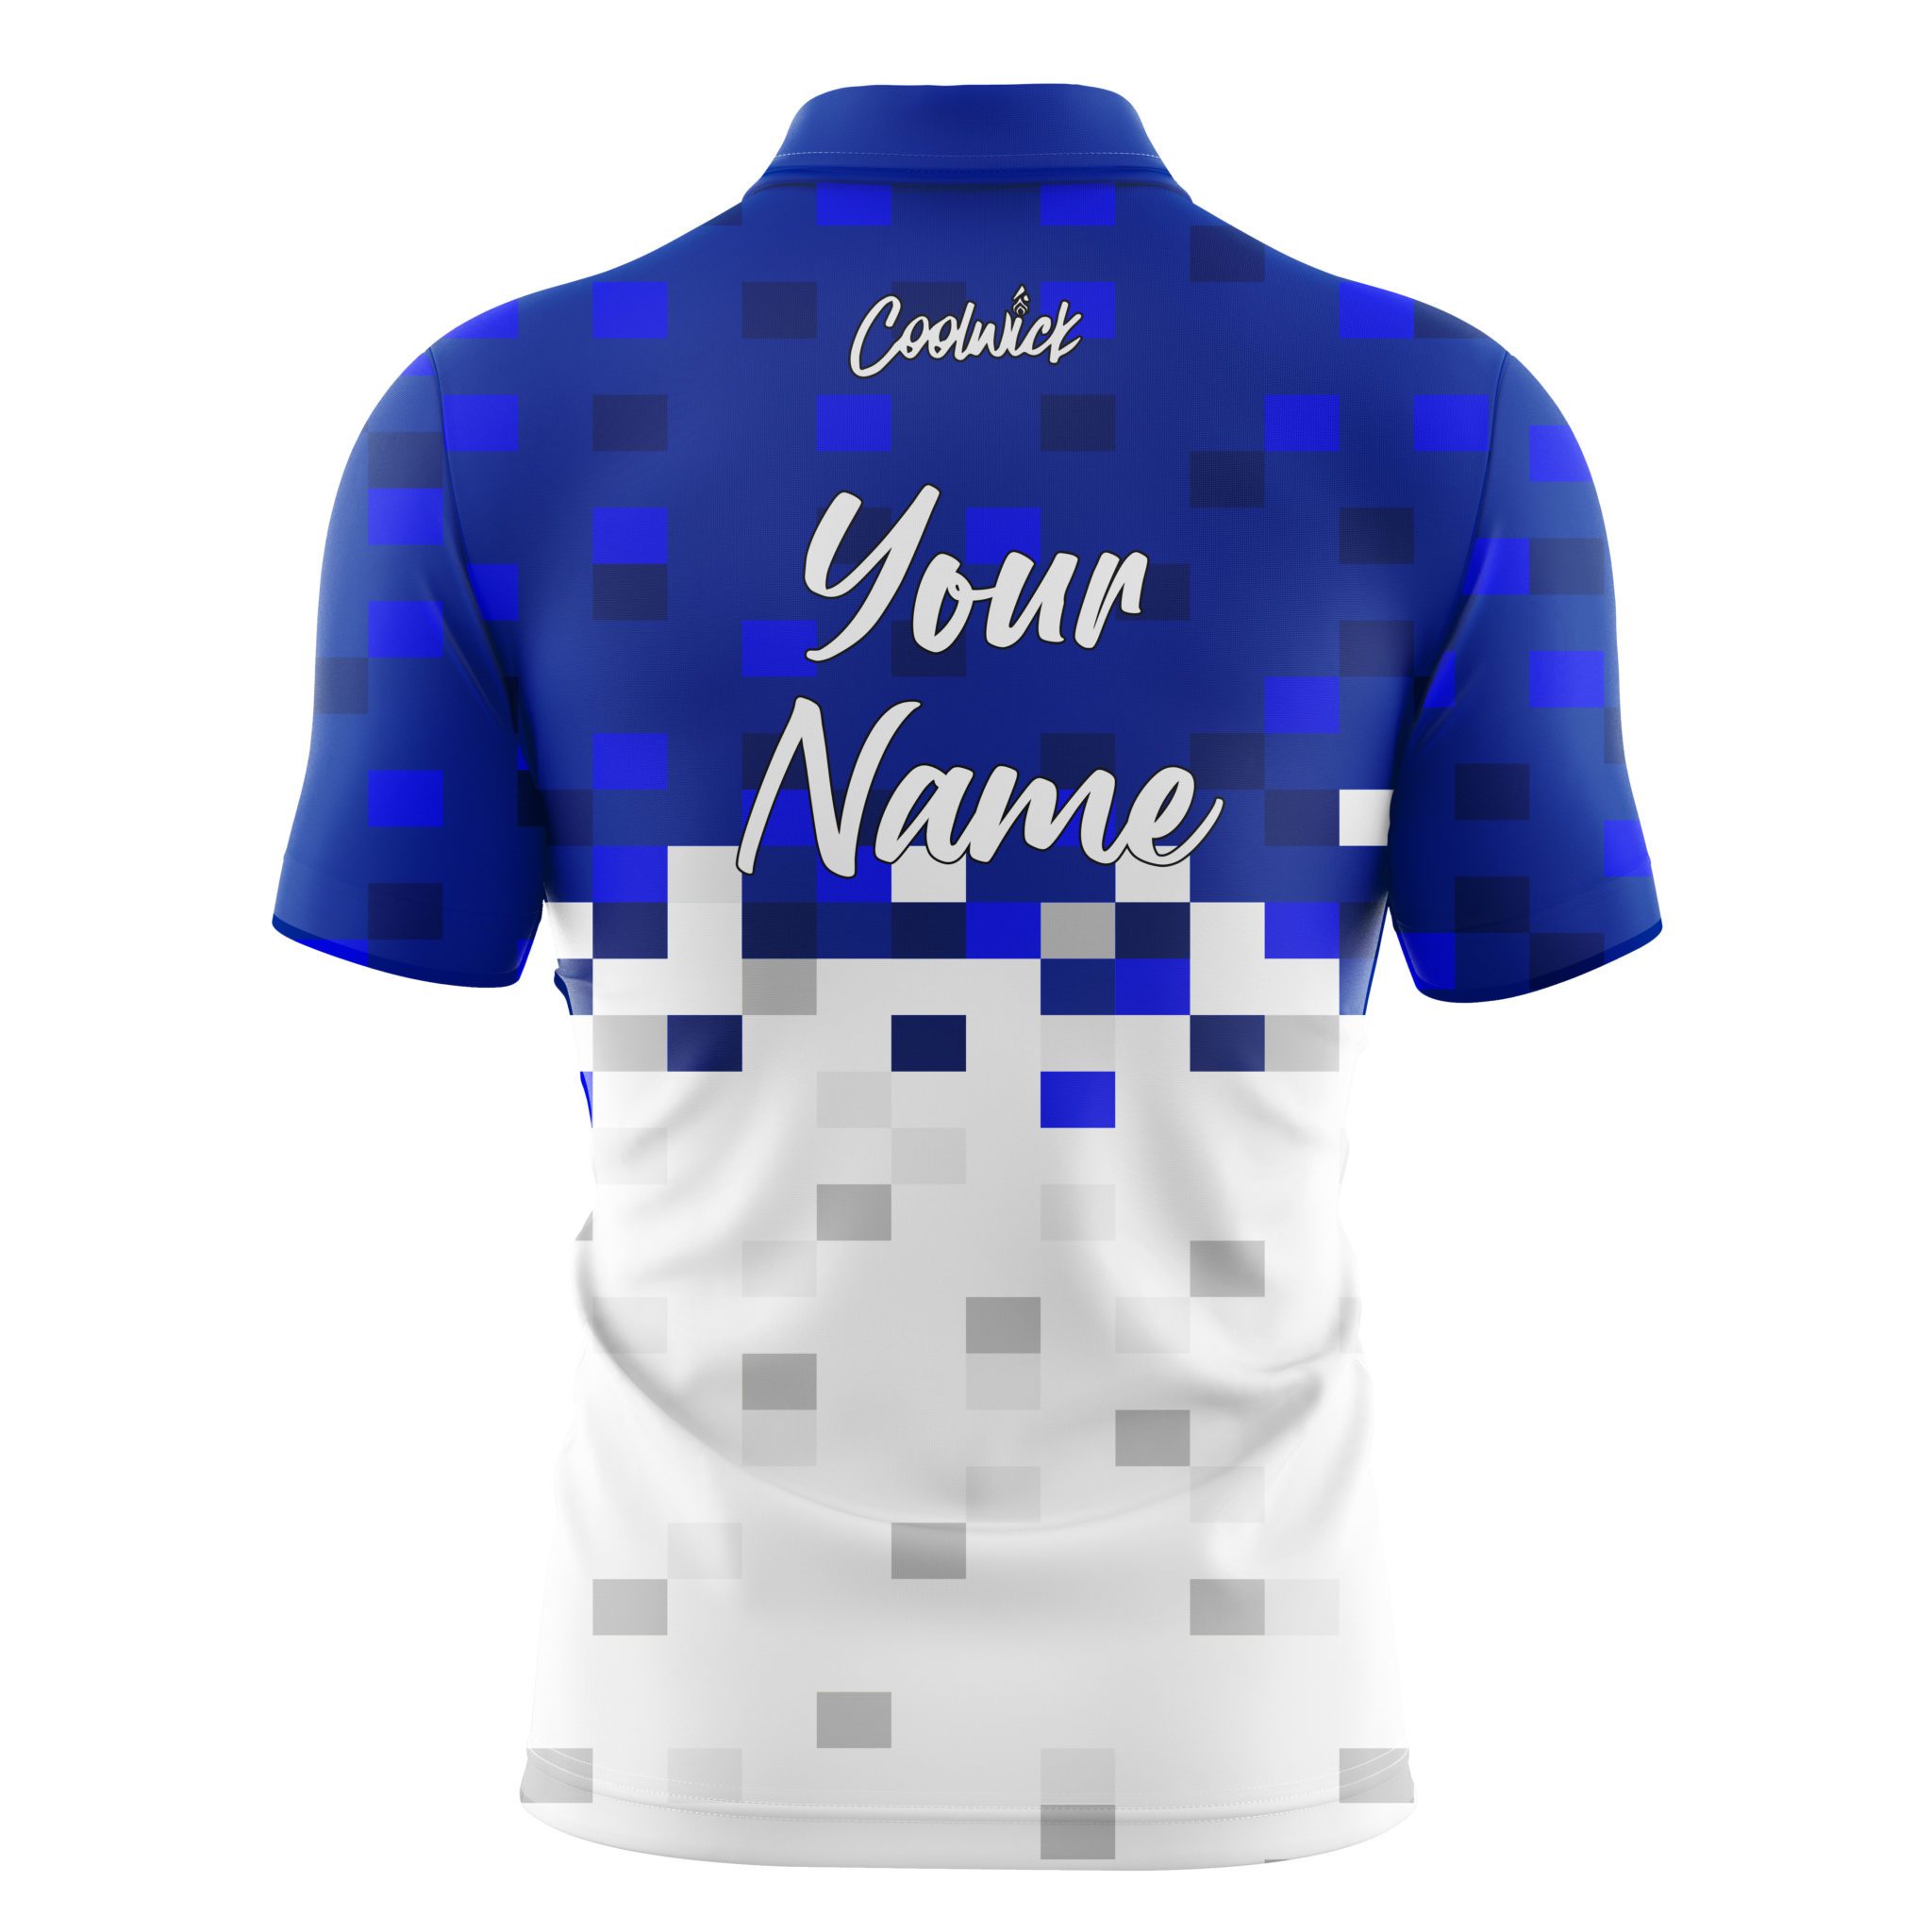 Branded, Stylish and Premium Quality sublimation hoodie jersey